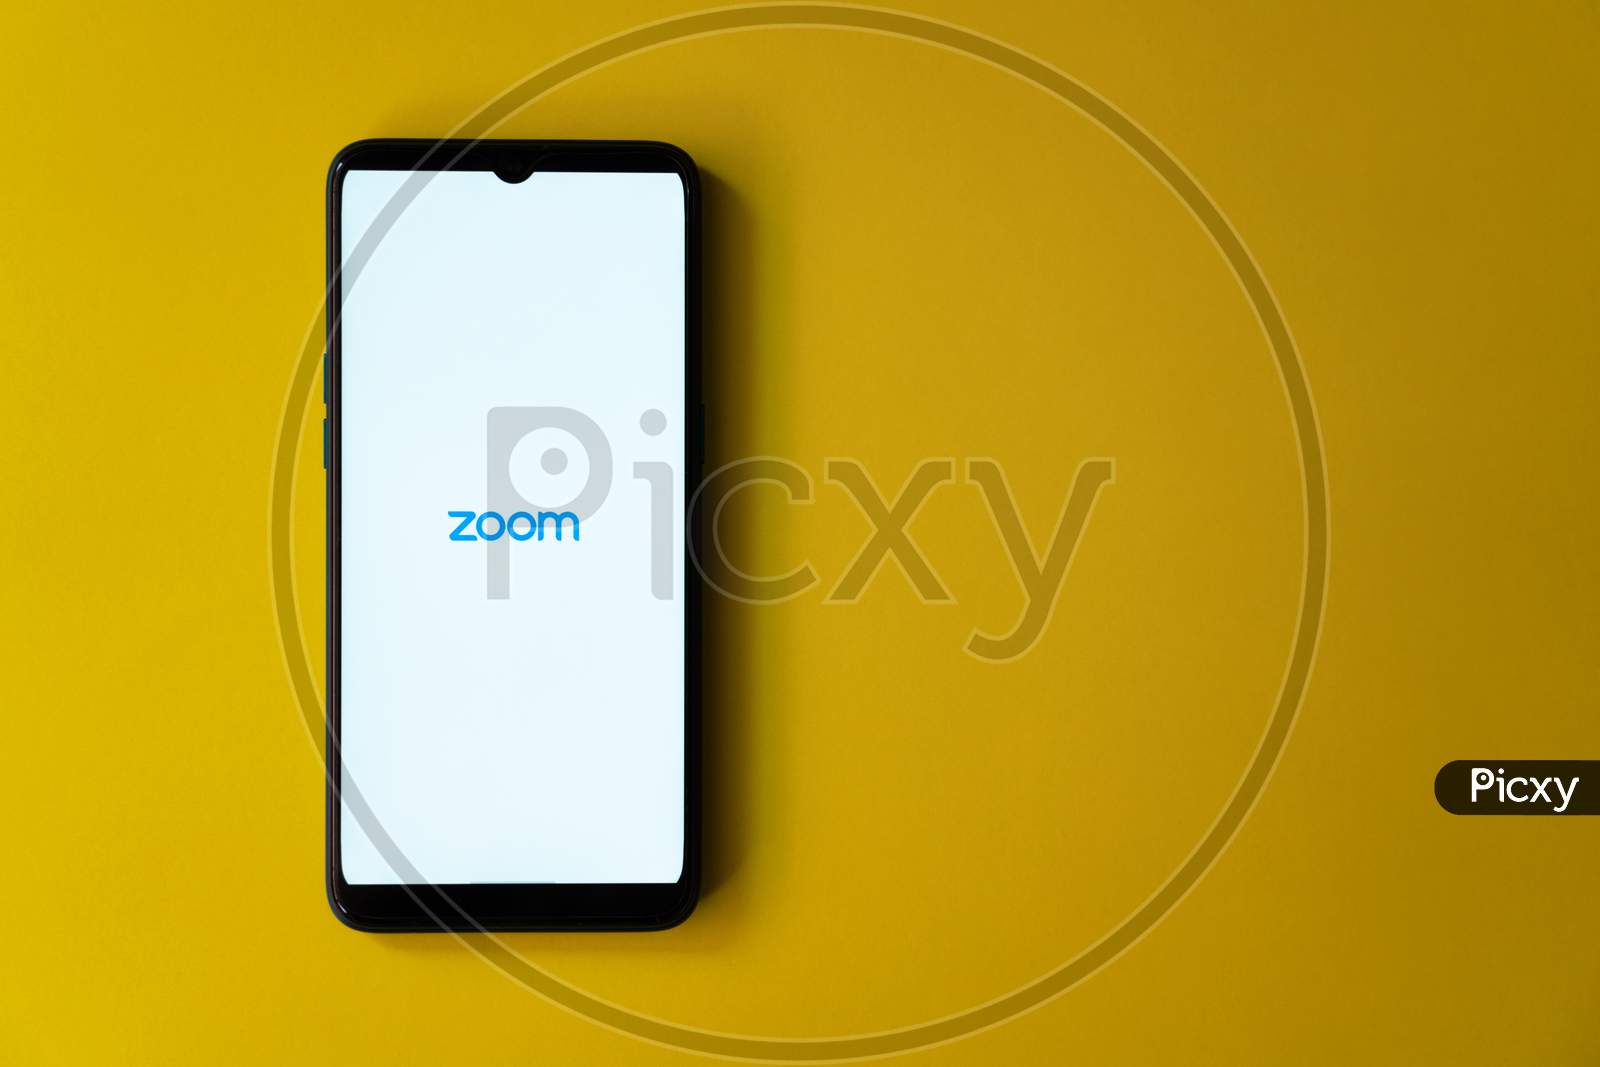 Zoom app home page on a smart phone against yellow background with copy space